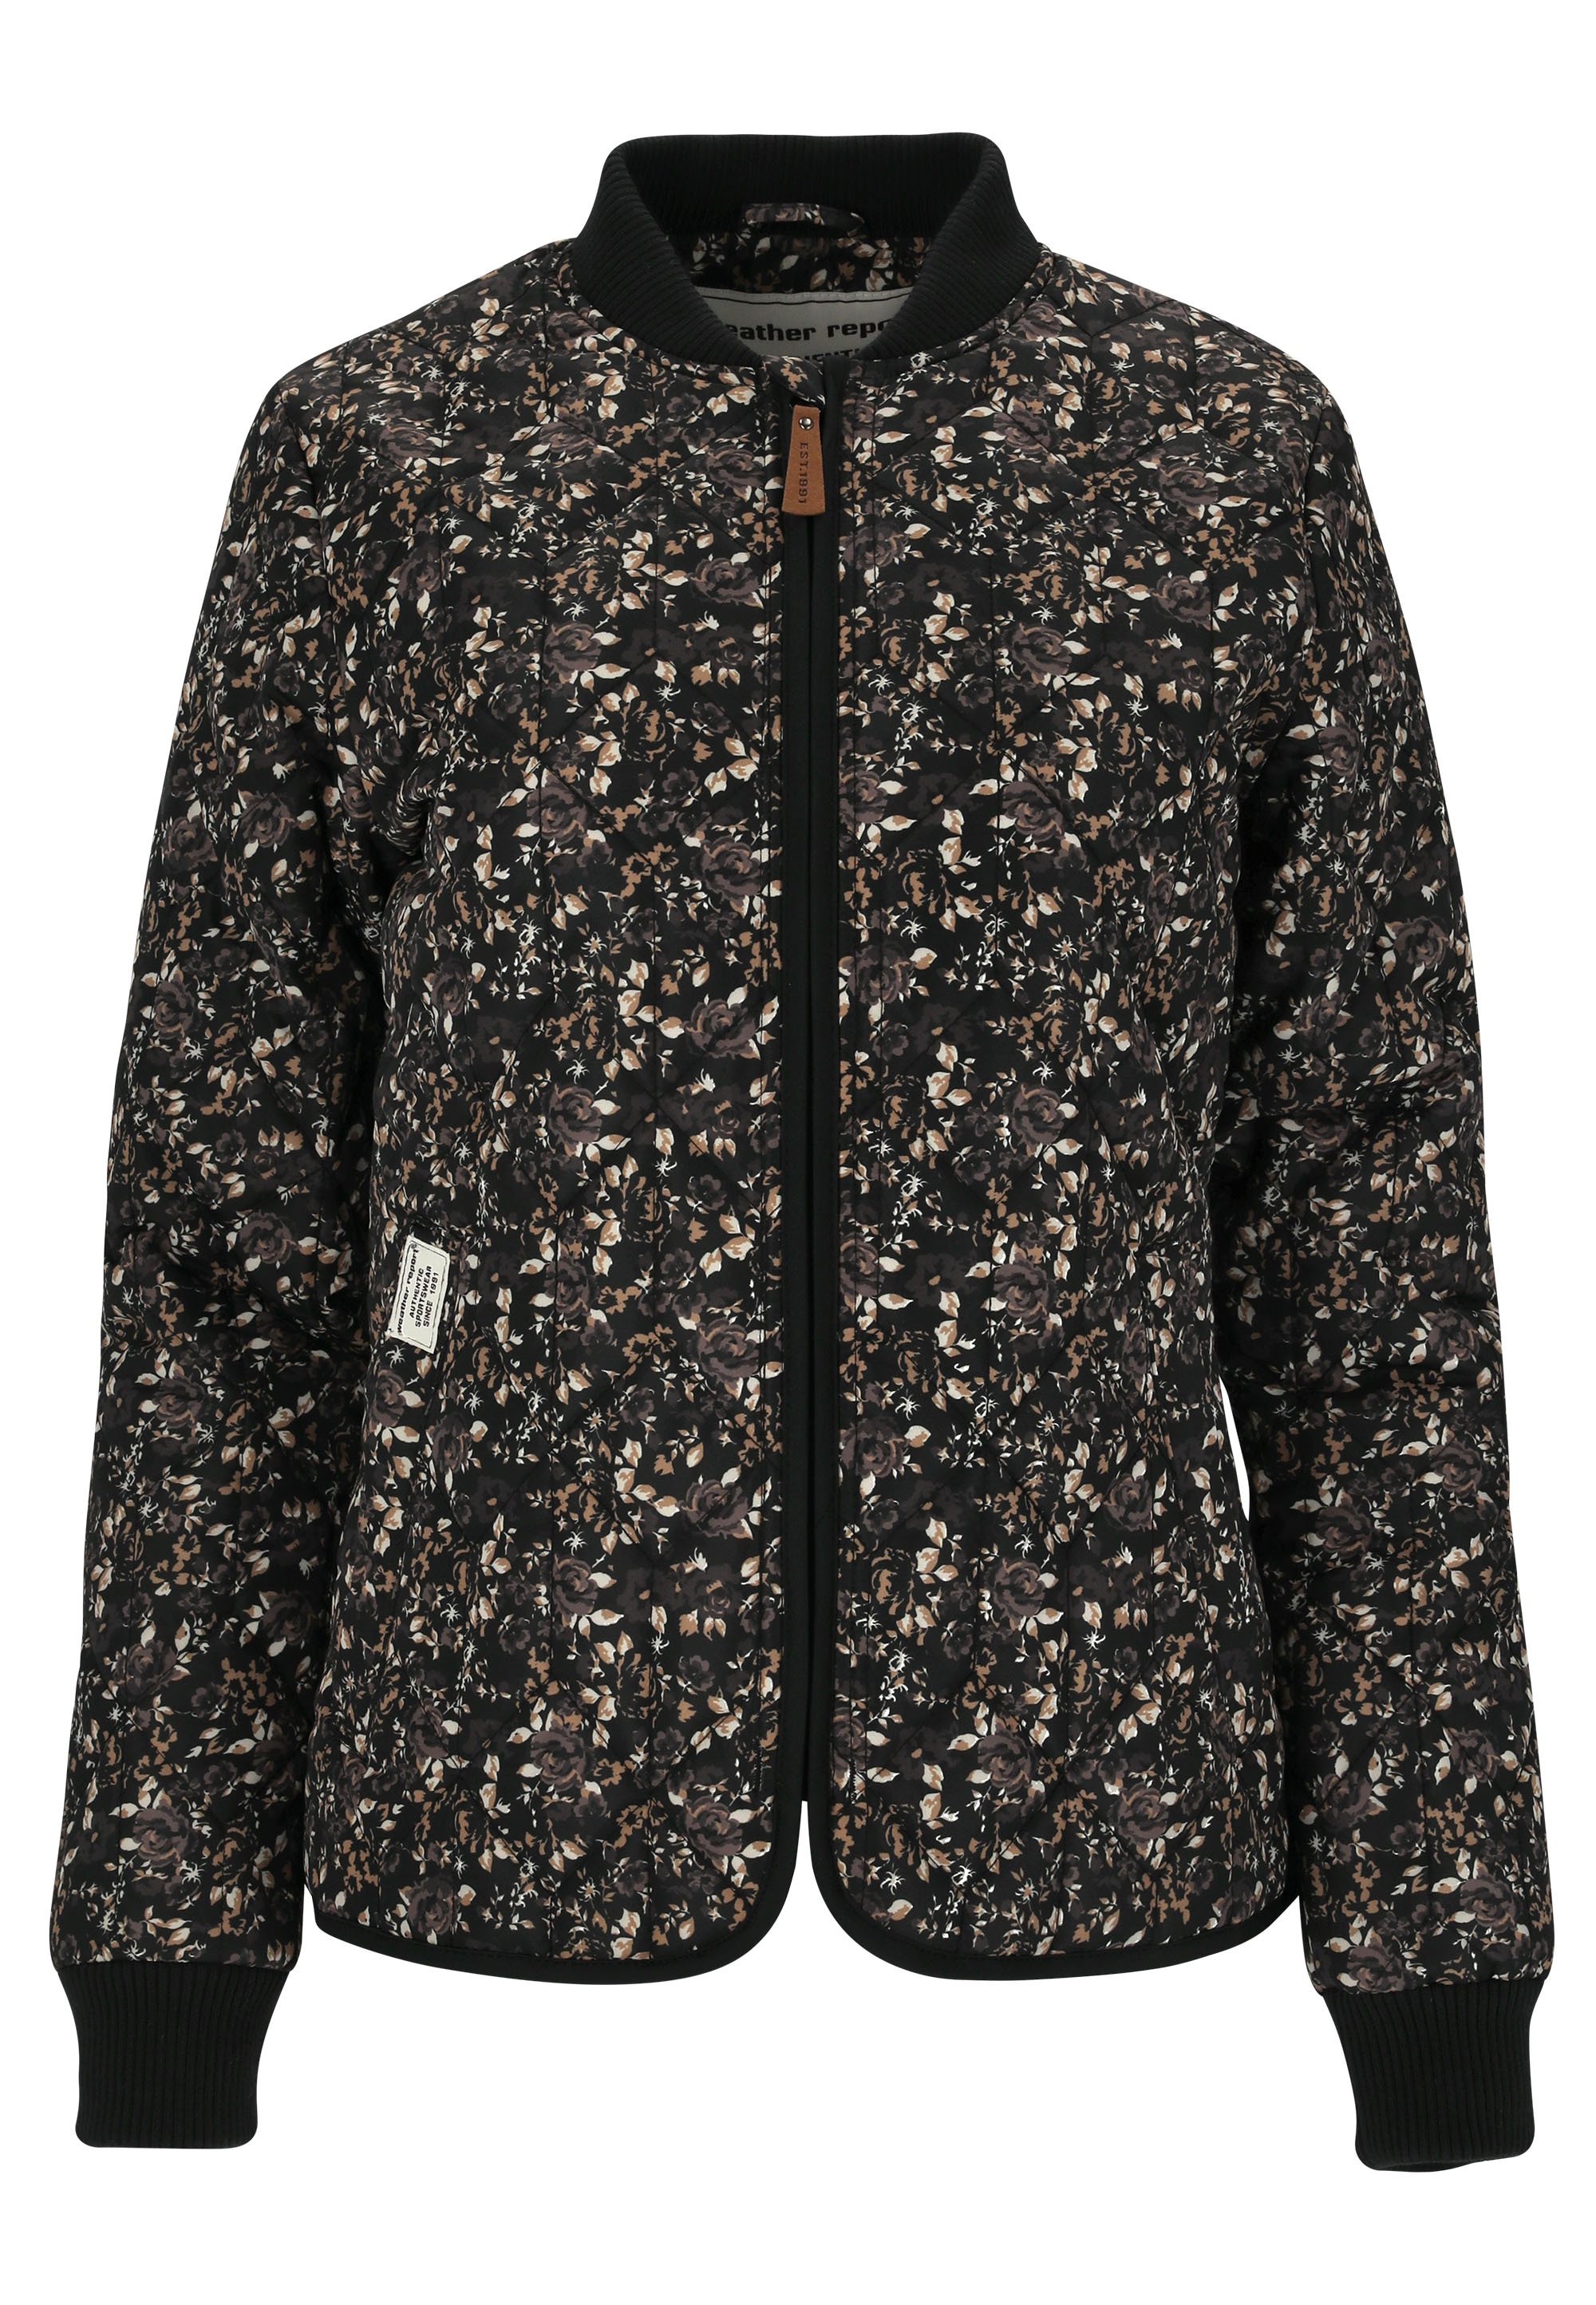 WEATHER REPORT Outdoorjacke »Floral«, mit floralem Allover-Muster online